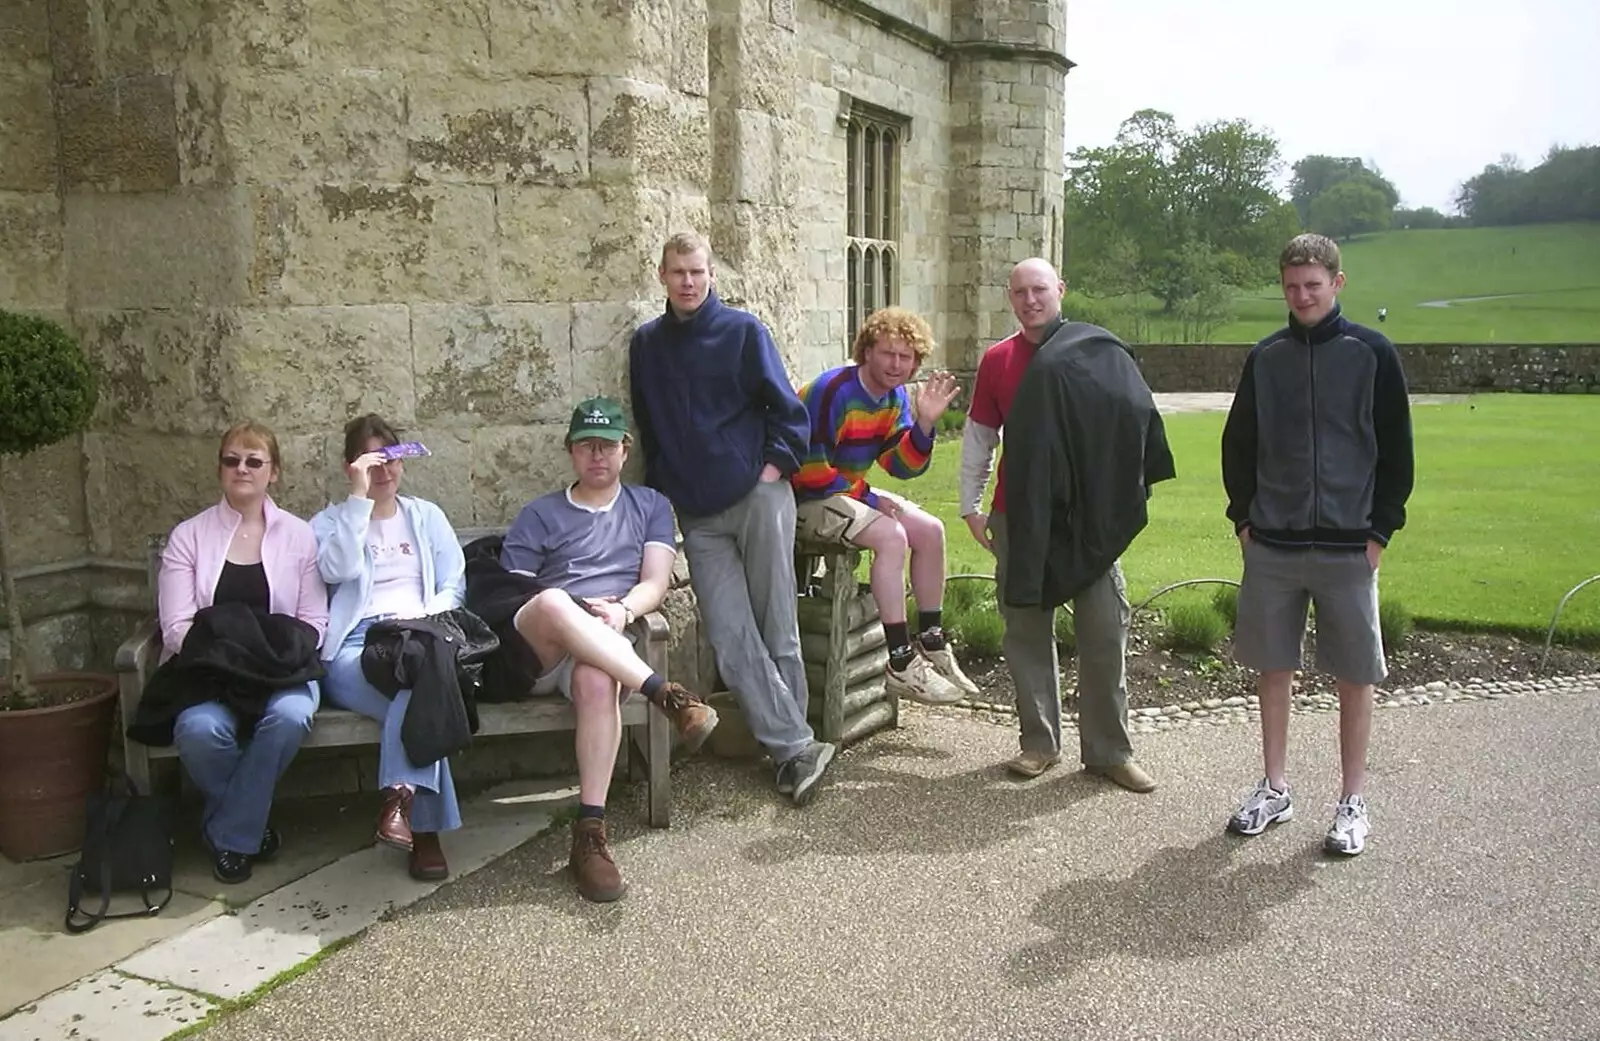 The gang wait for Nosher outside the castle, from A Trip Around Leeds Castle, Maidstone, Kent - 9th May 2004